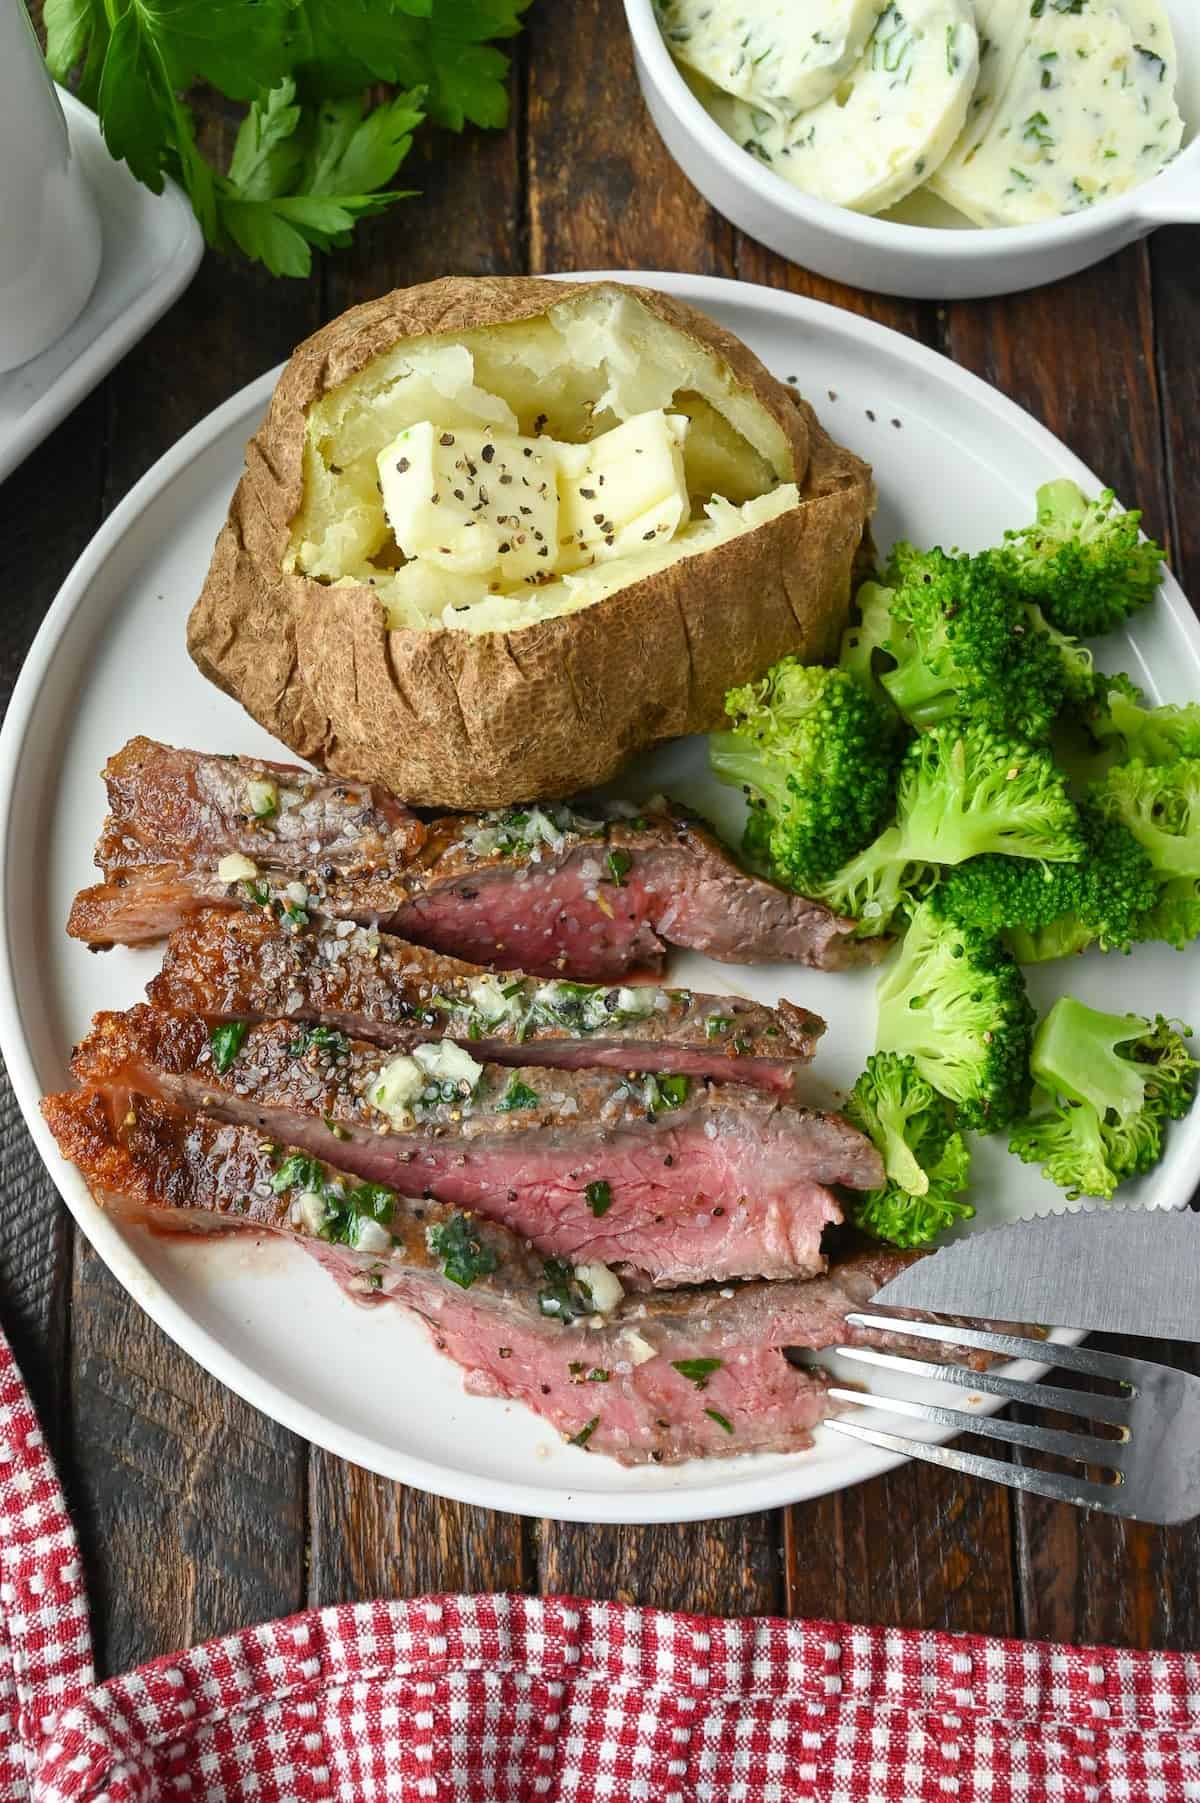 Sliced broiled steak on a plate with a baked potato and broccoli.